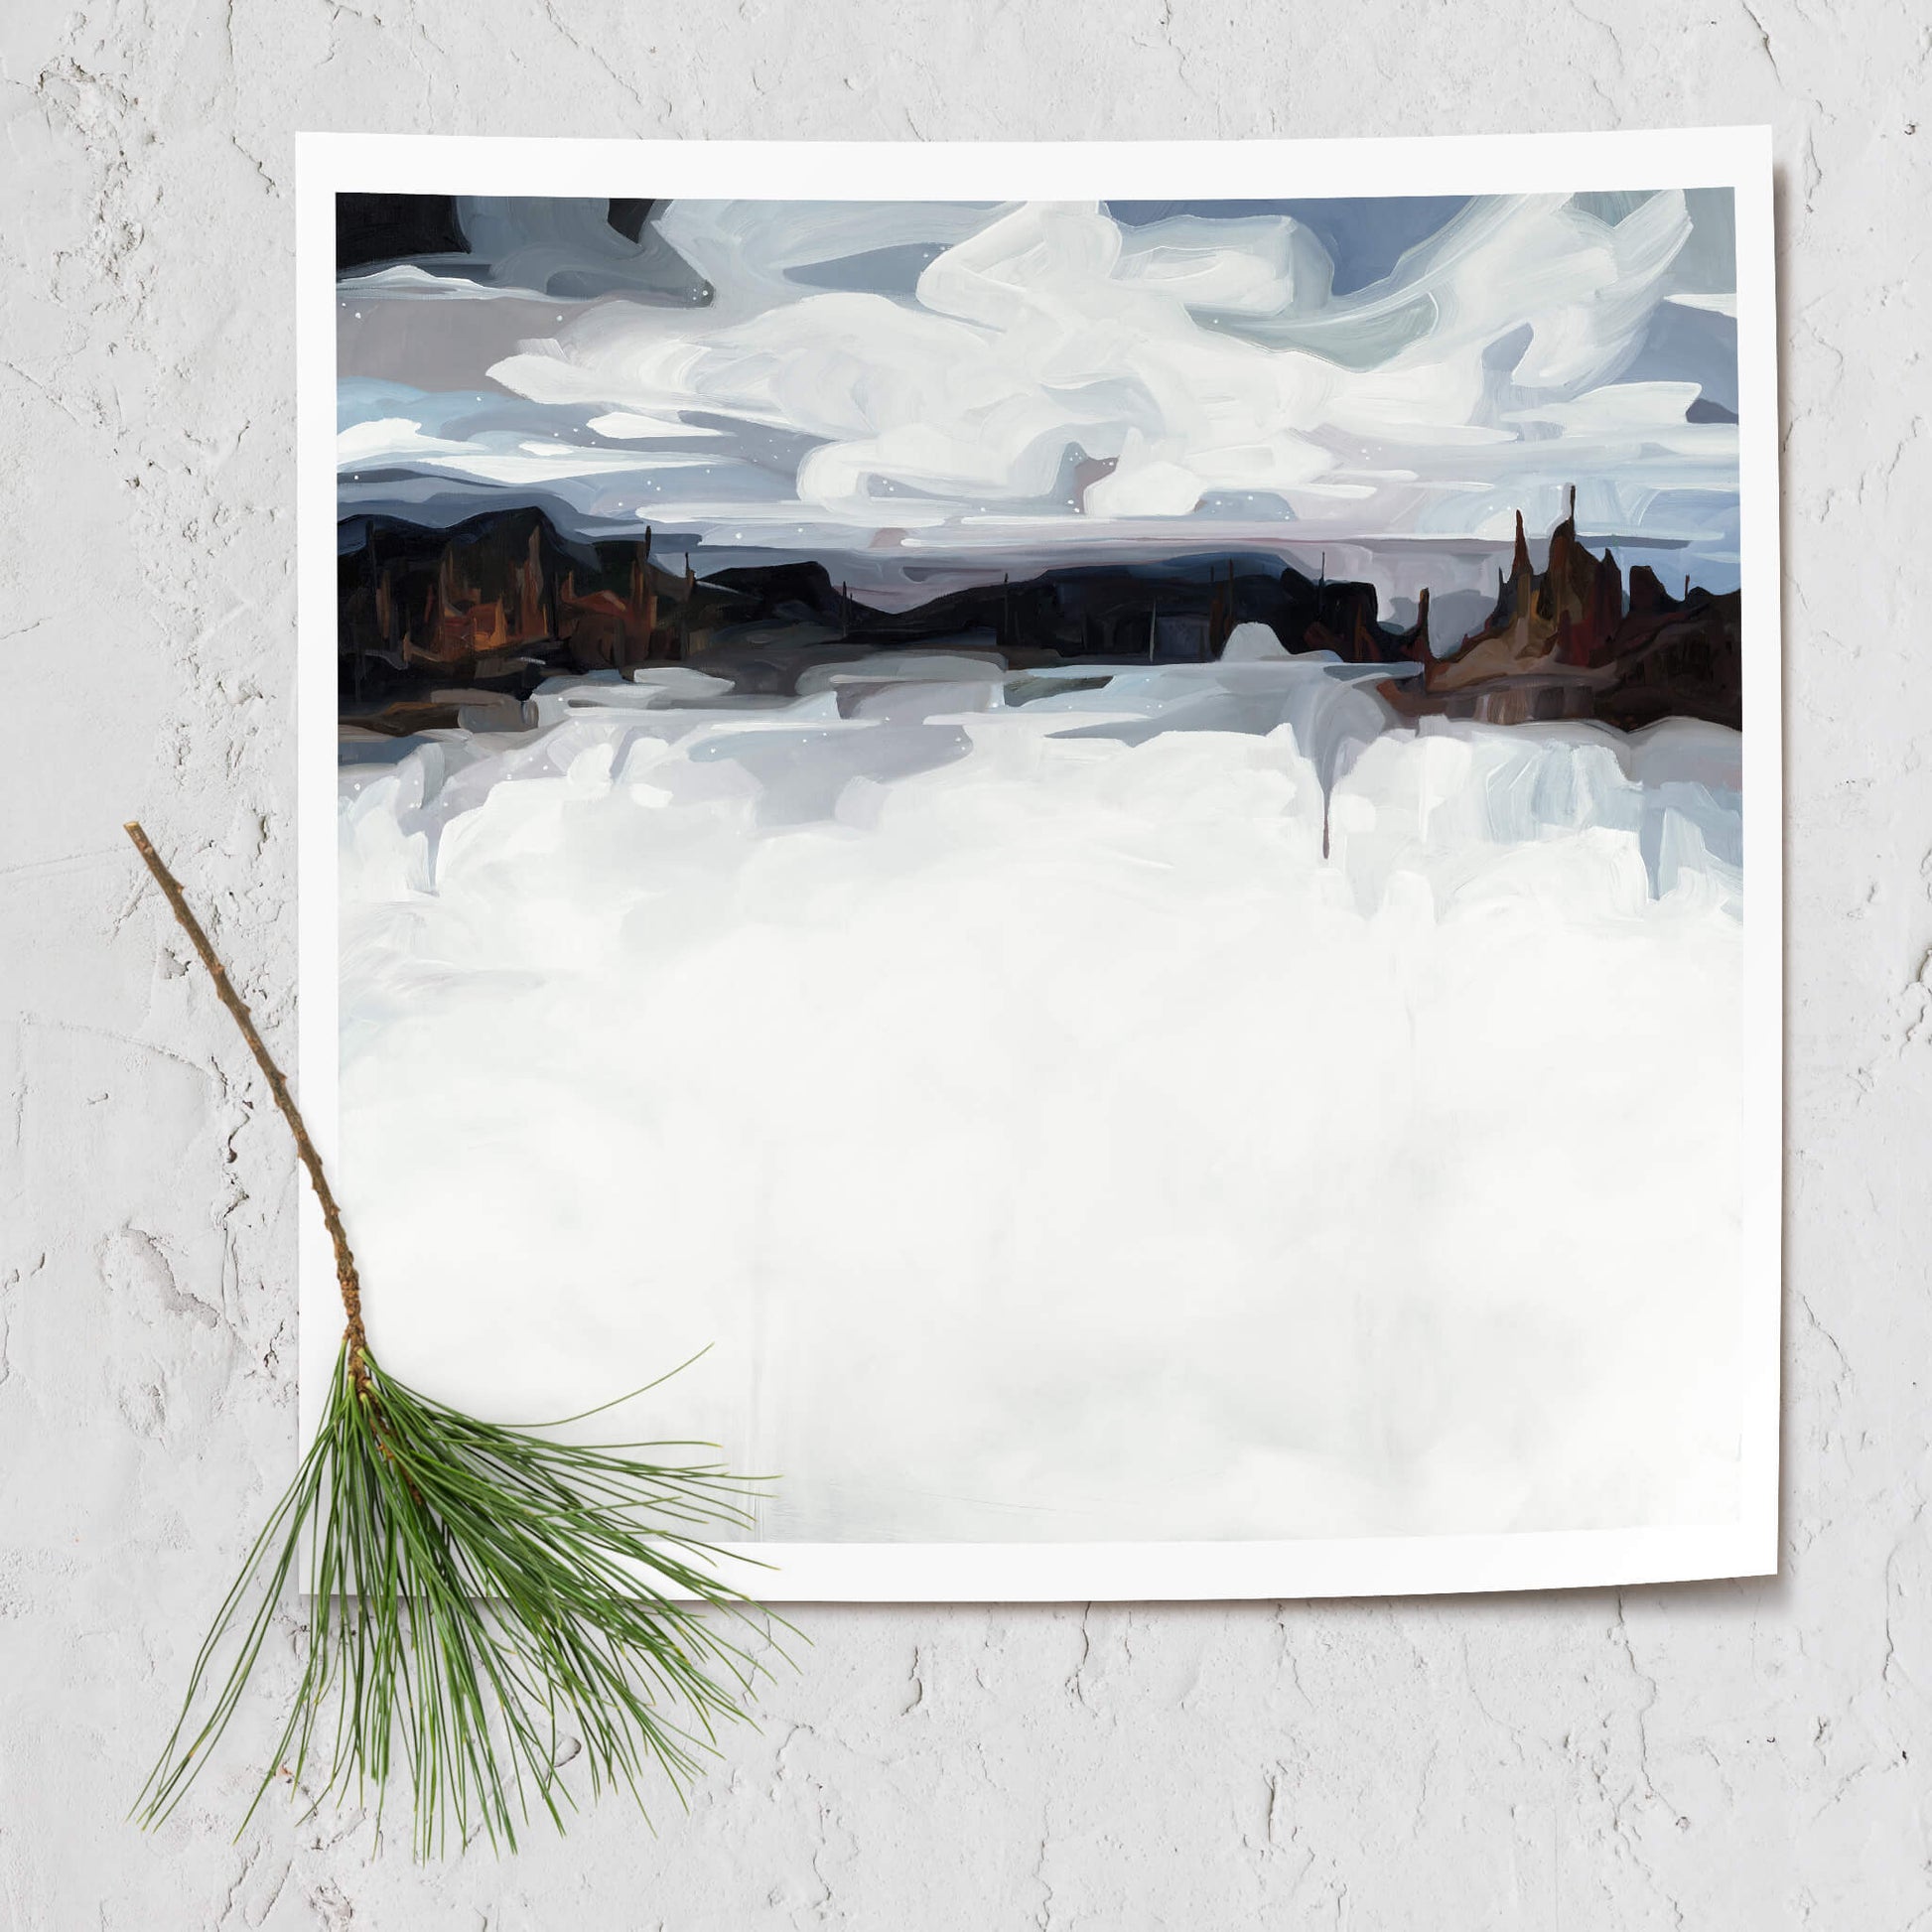 'Winterland' a fine art print of a snowy winter scene of an abstract landscape by Canadian artist Susannah Bleasby